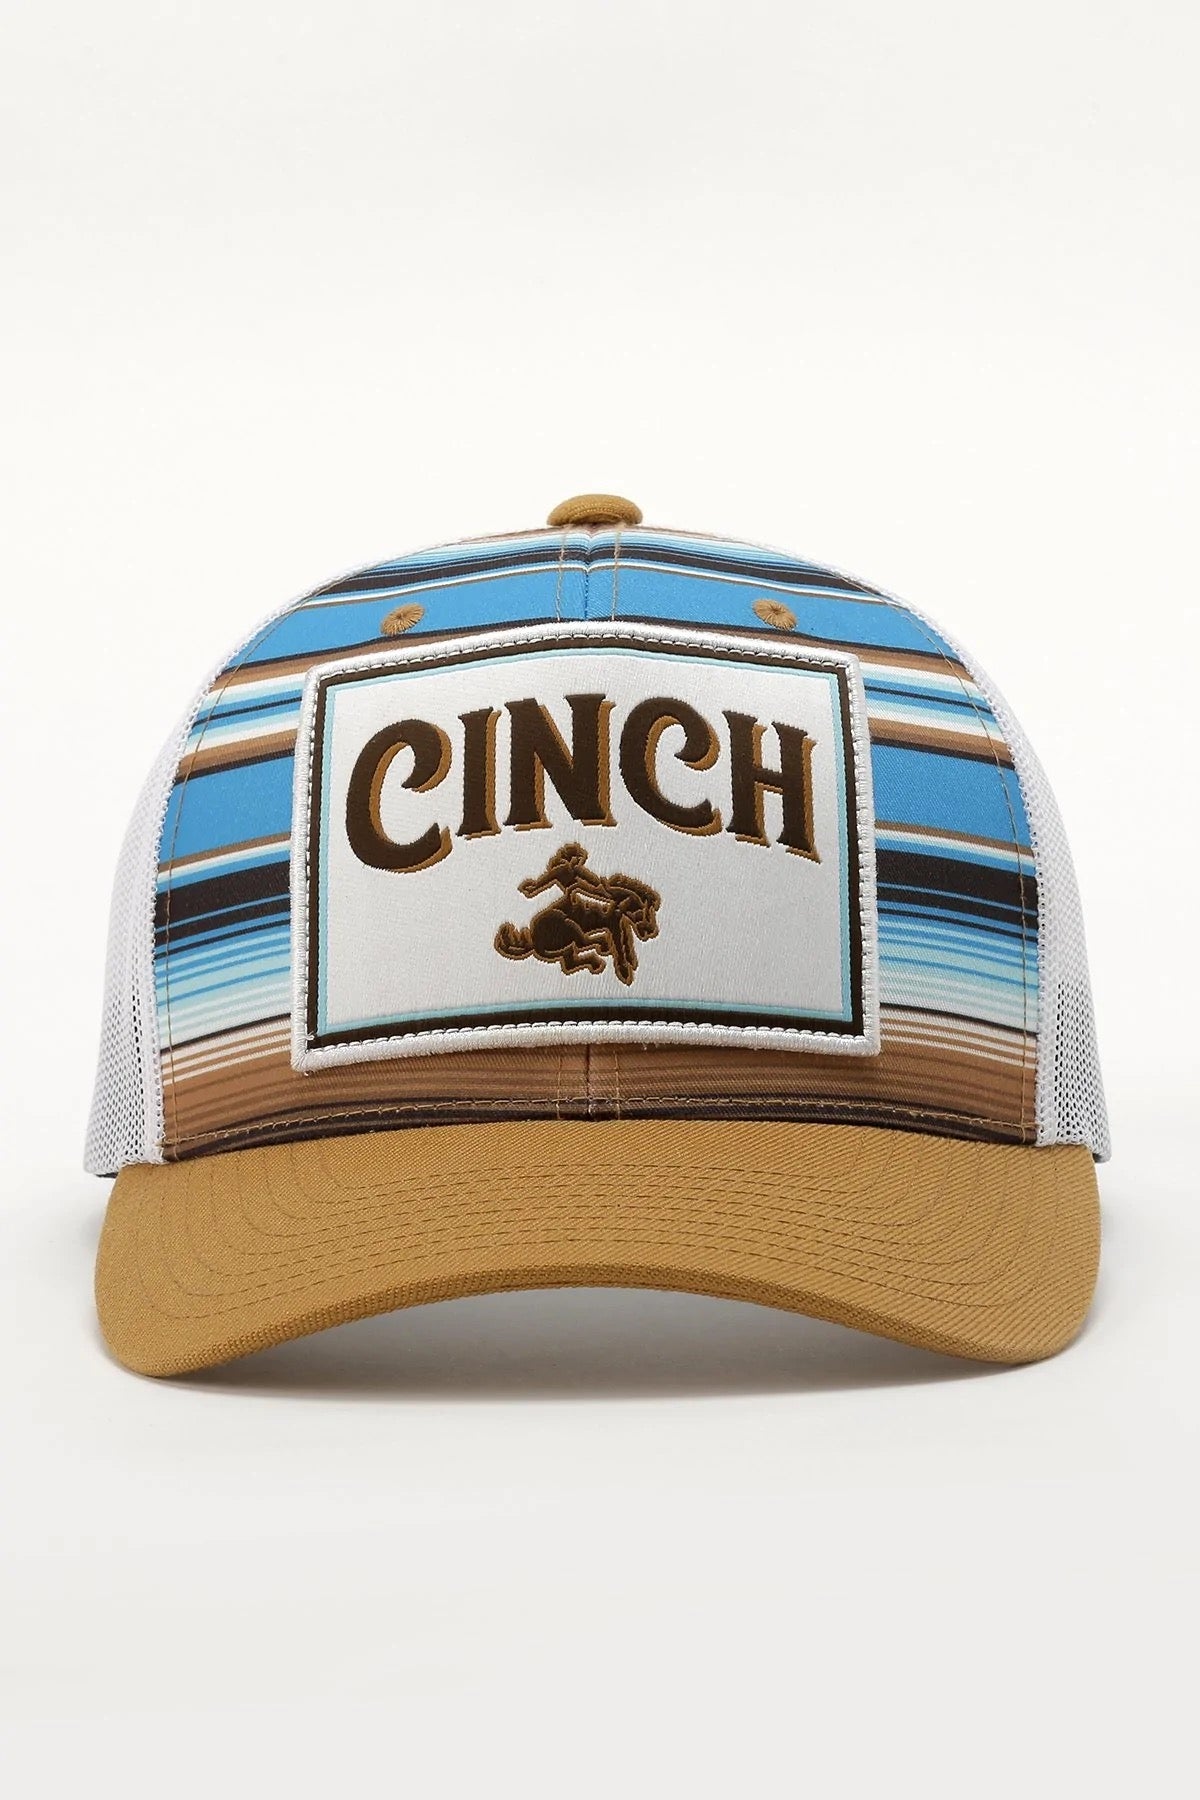 CINCH MENS TOFFEE/ TURQUOISE STRIPED BASEBALL CAP CAP